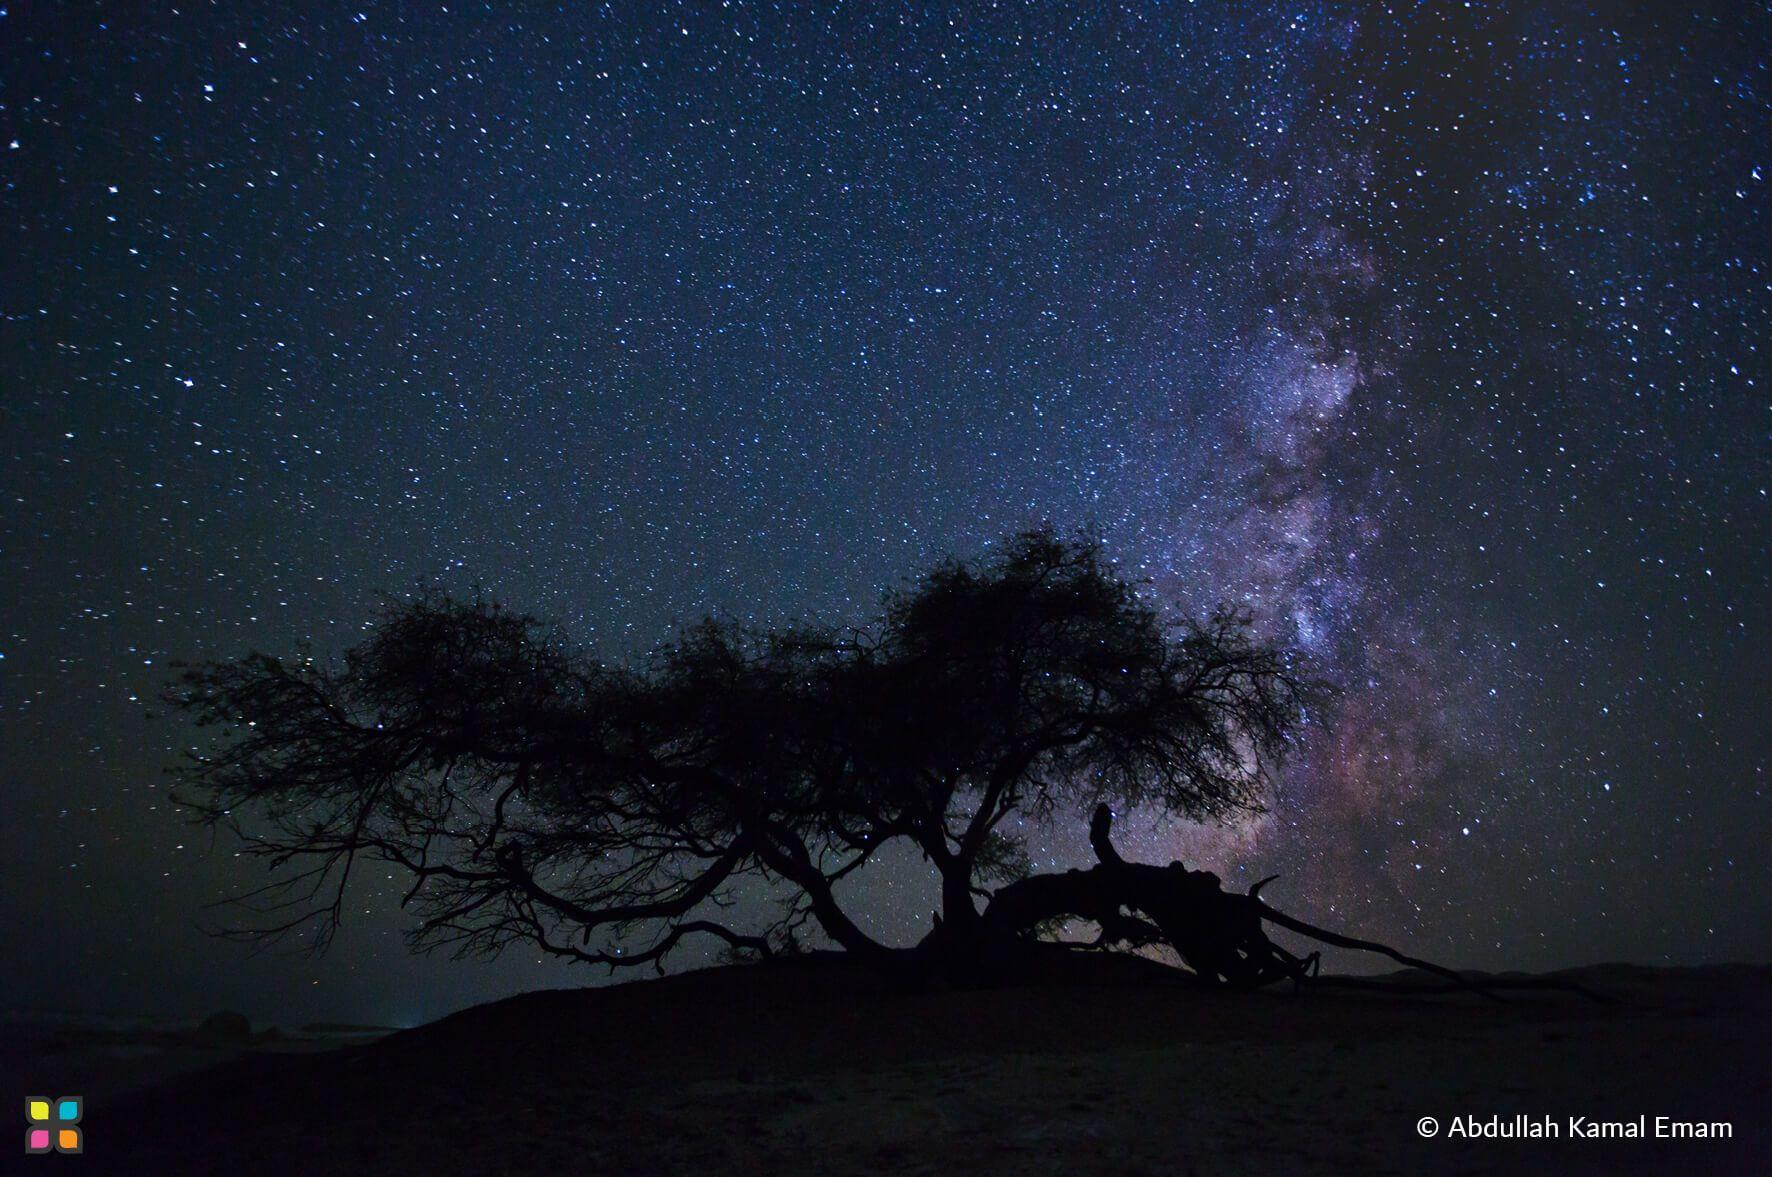 A ghaf tree stands silhouetted against the vast galaxies of the night sky.
Photographer: Abdullah Kamal Emam   Location: UAE